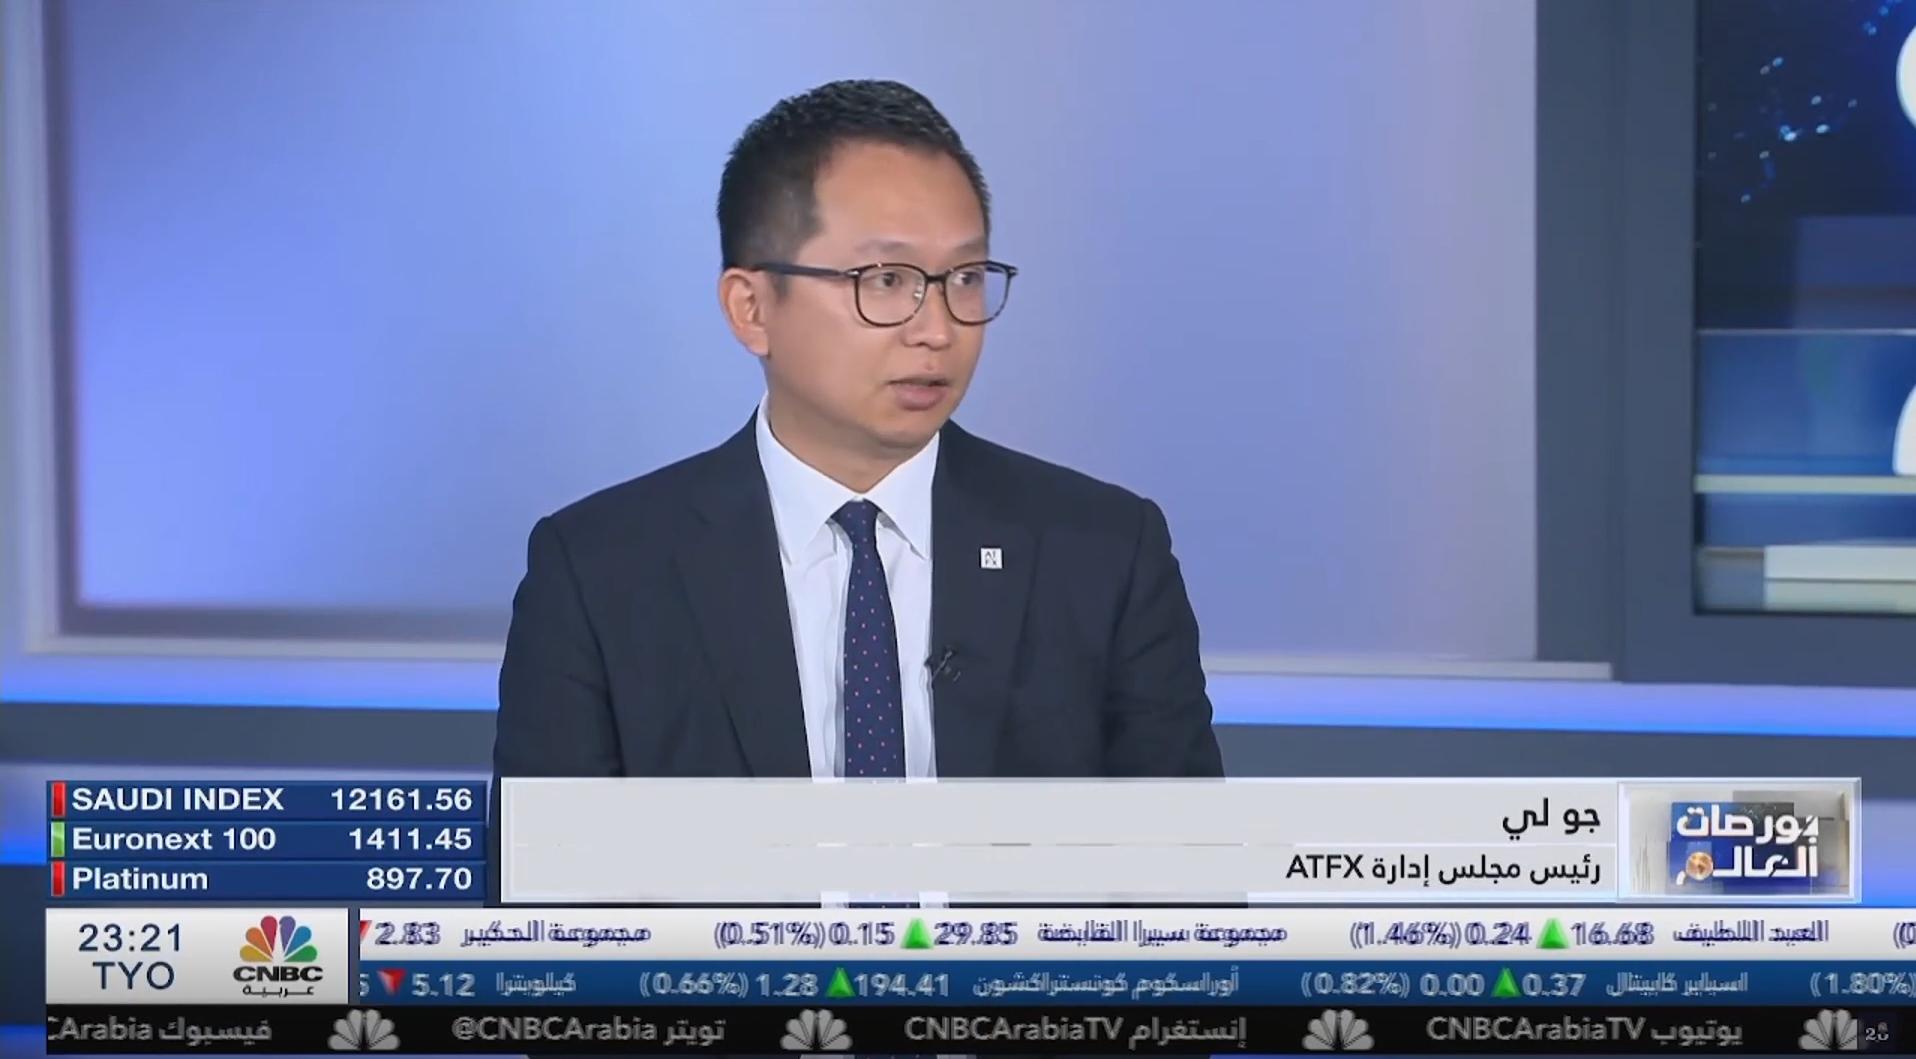 CNBCExclusive interviewsATFXGroup ChairmanJoe LiFocusing on investor needs and building the industry...254 / author:atfx2019 / PostsID:1727697